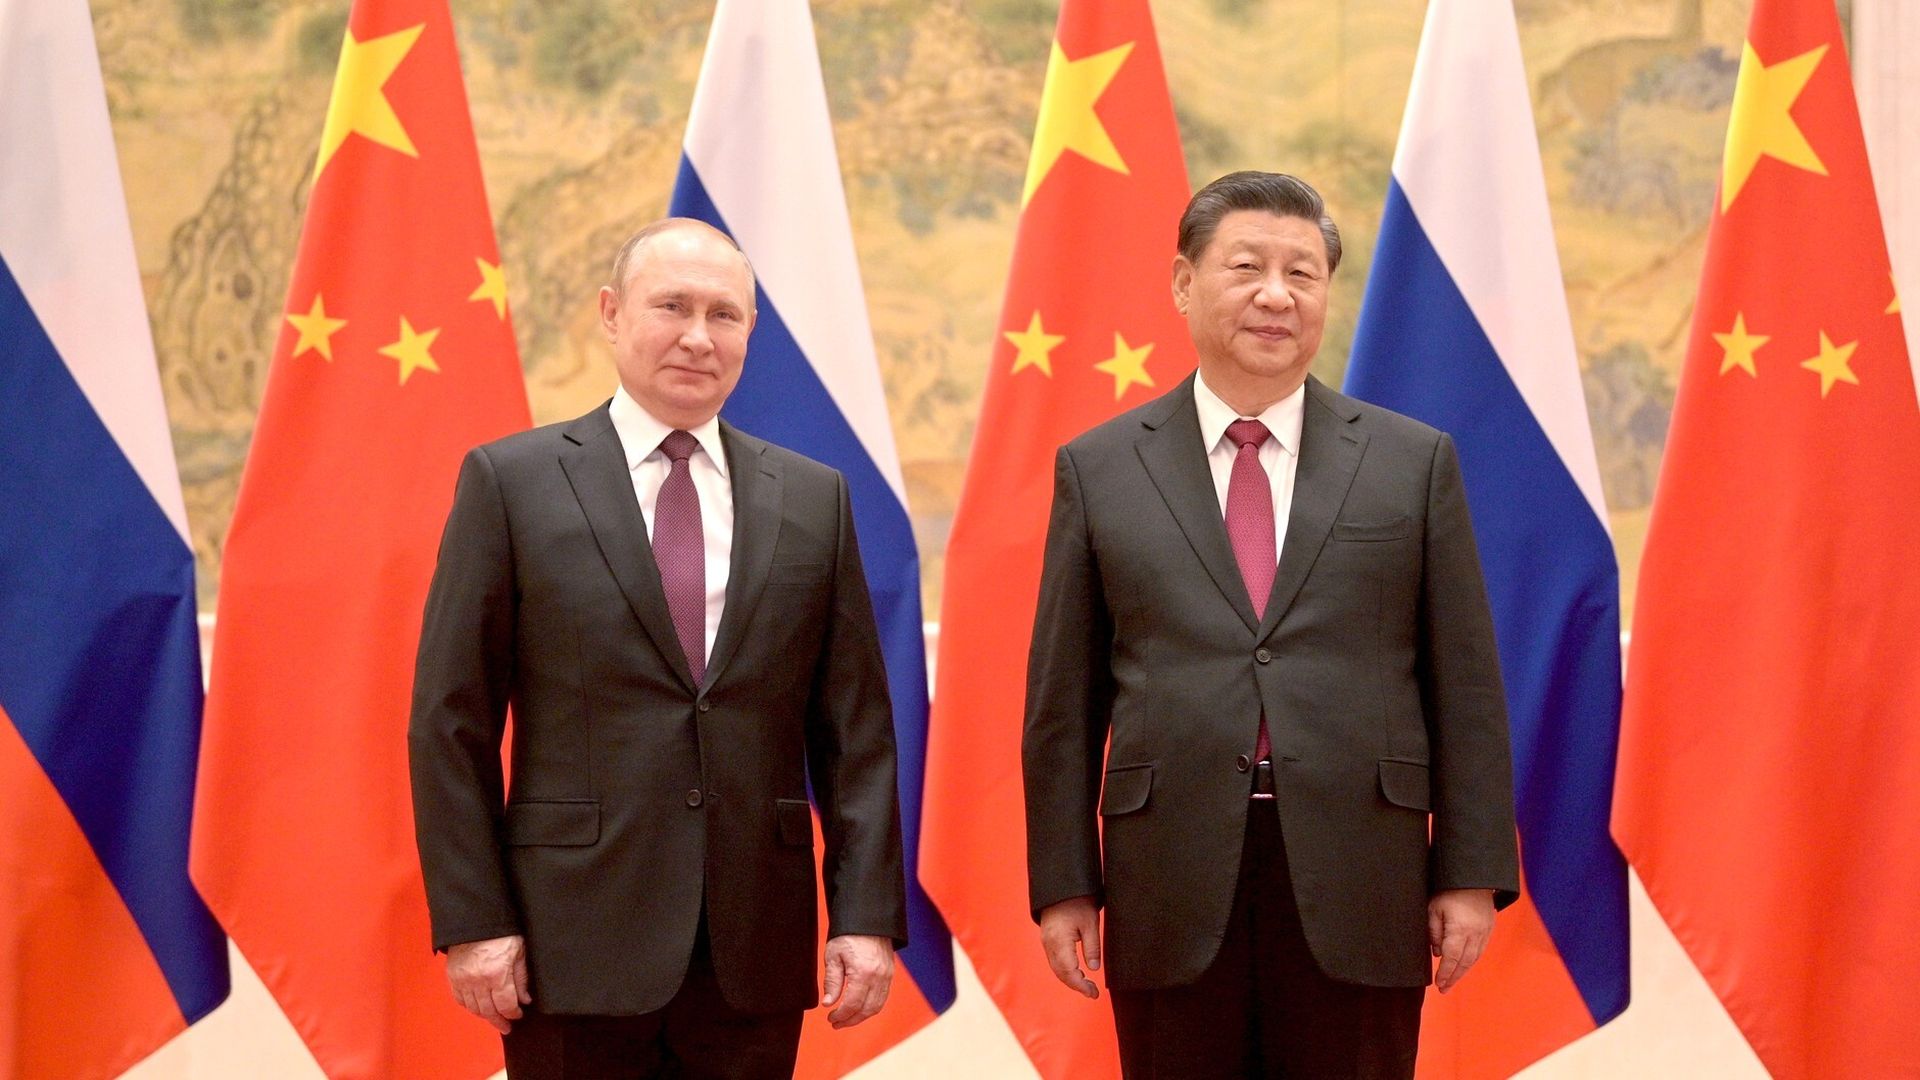 Russian President Vladimir Putin (L) and Chinese President Xi Jinping (R) meet in Beijing, China on February 4.